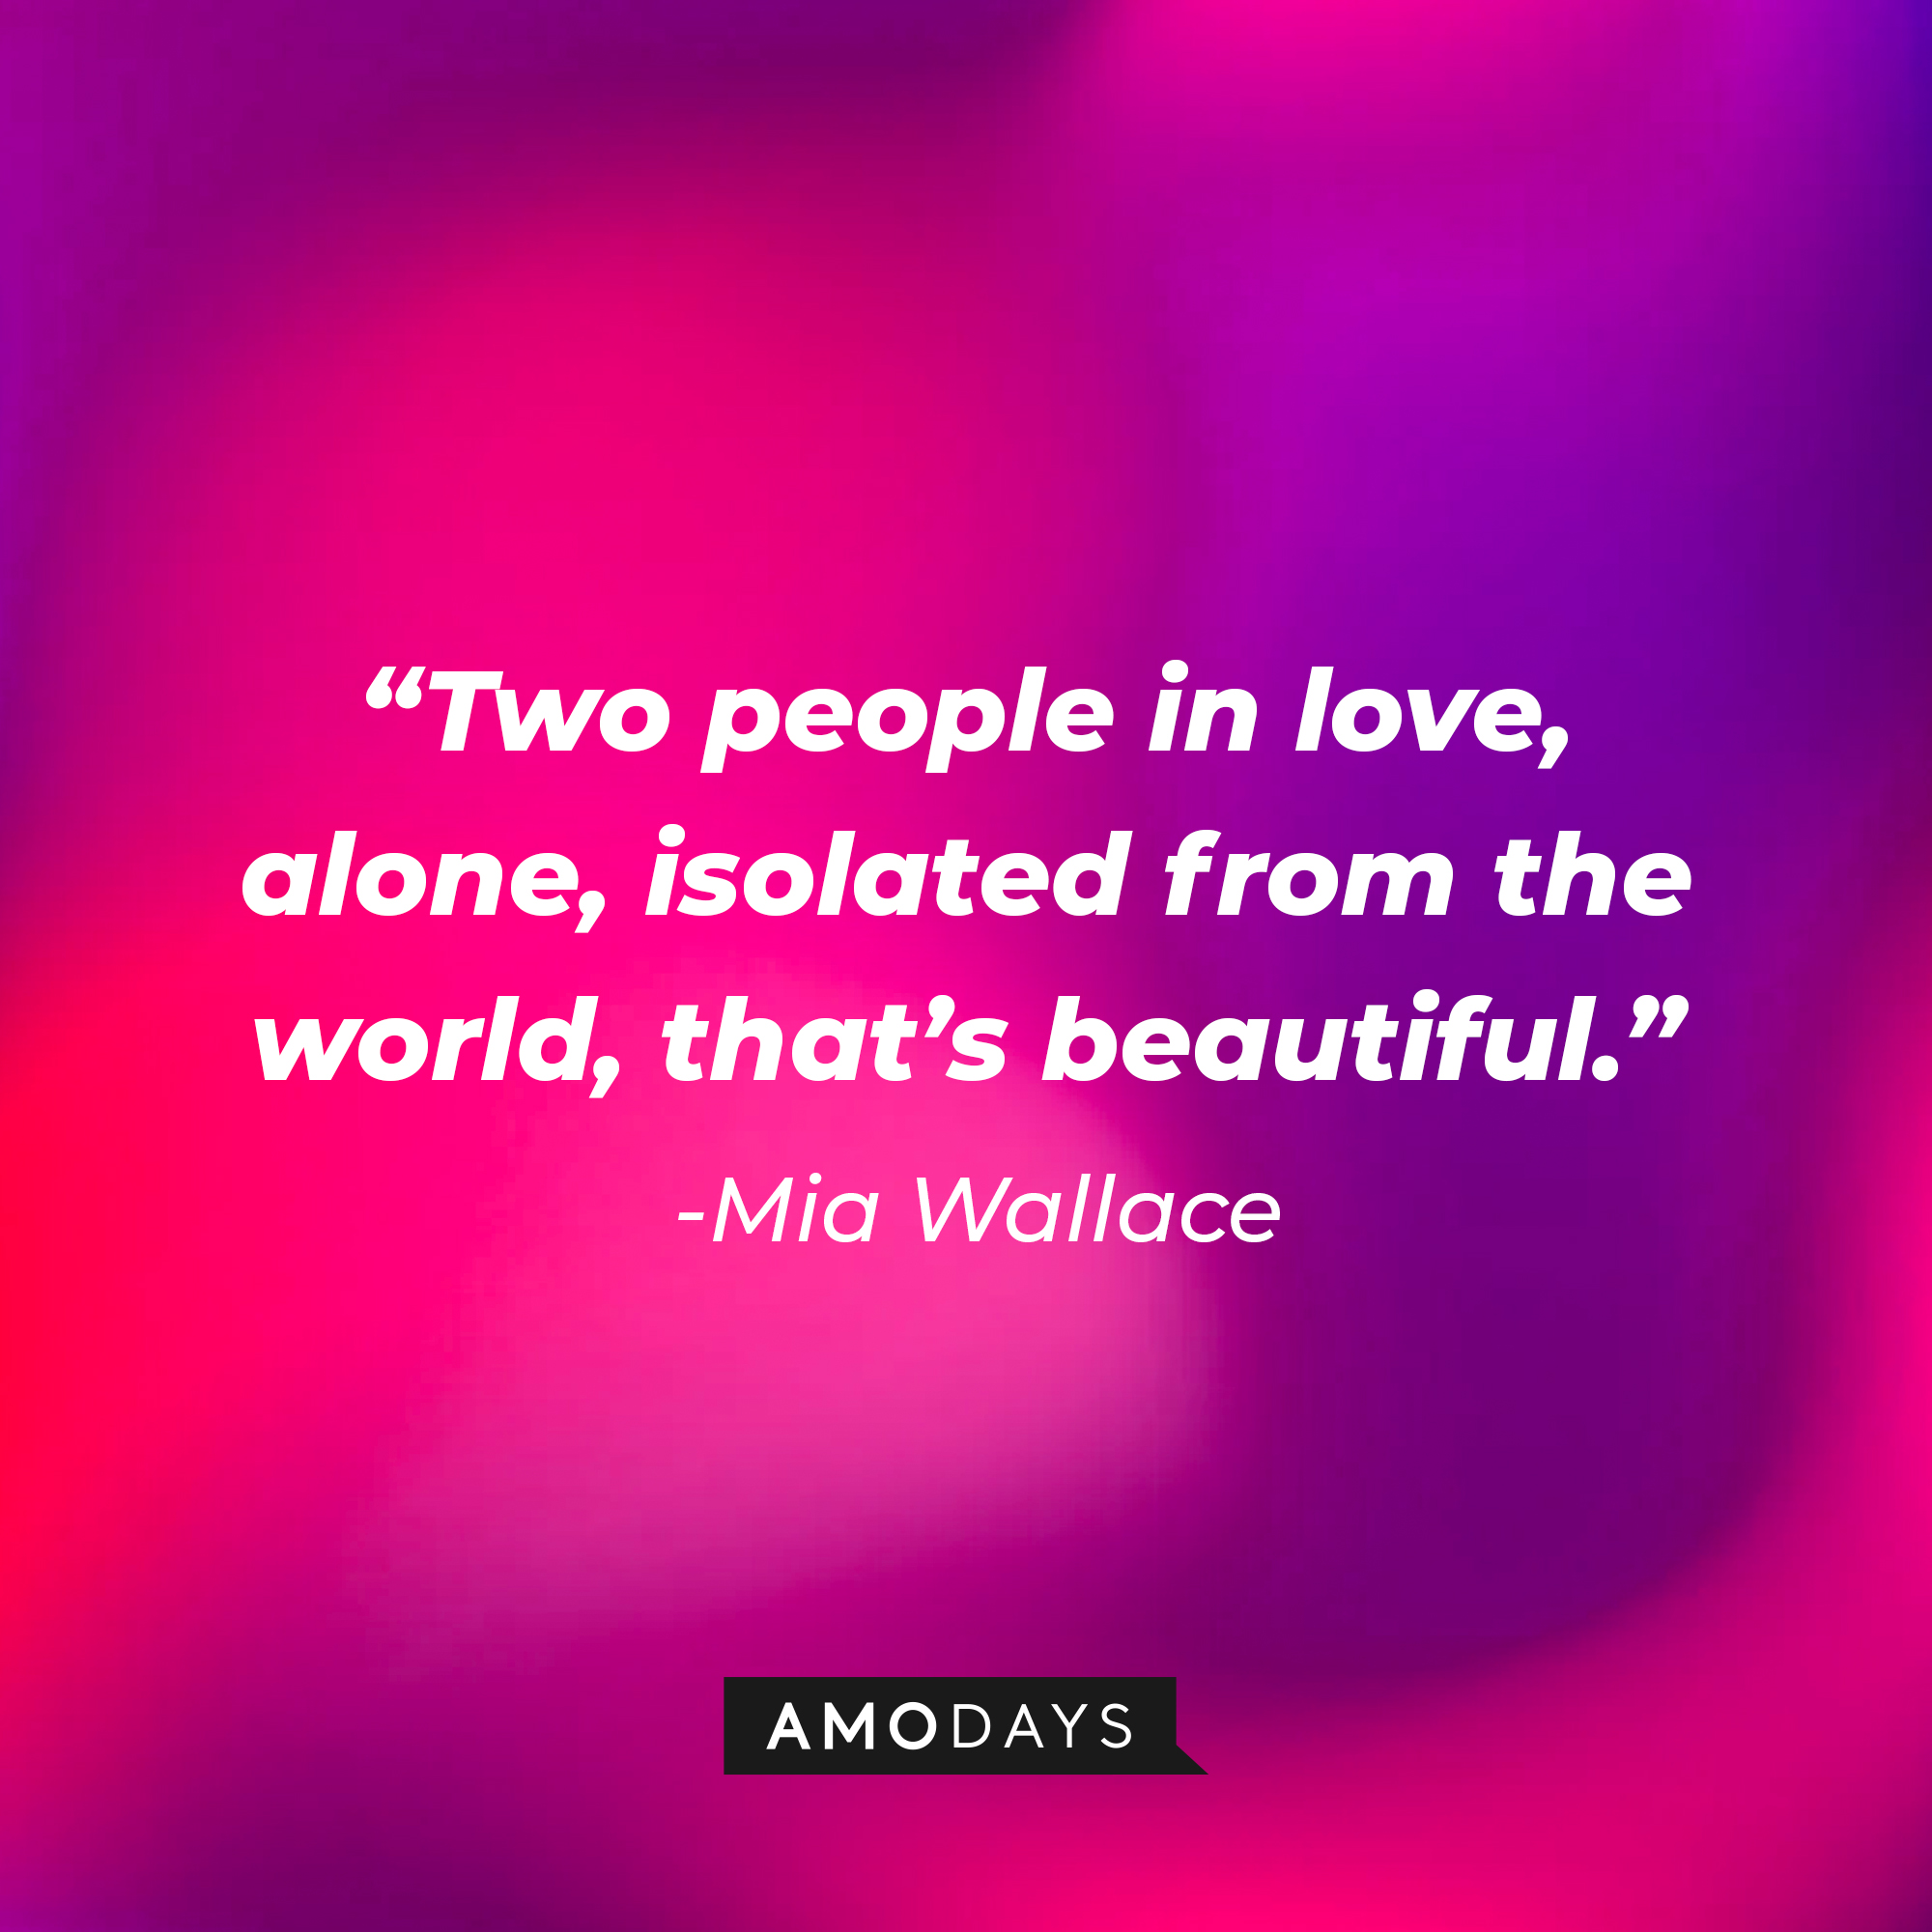 Mia Wallace’s quote: “Two people in love, alone, isolated from the world, that’s beautiful.” | Source: AmoDays